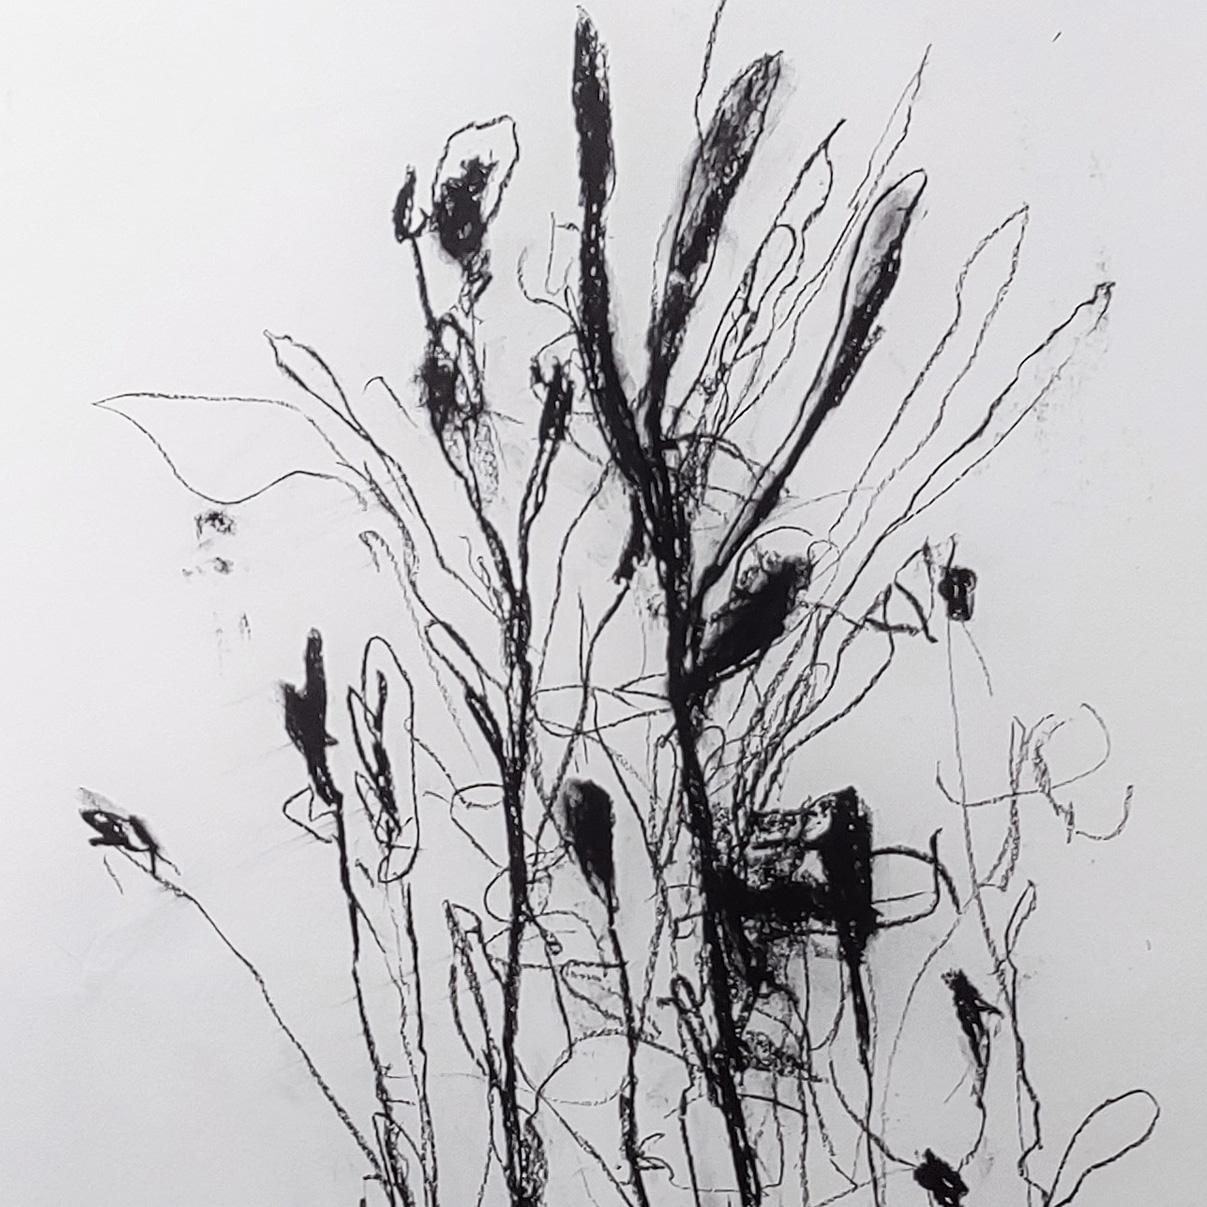 In the weeds ink bloom #3 (Abstract painting)

Charcoal & Oilstick on paper - Unframed.

Baribeau constructs his paintings layer upon layer, building color, form and texture into viscous, impasto compositions, on supports that are themselves often